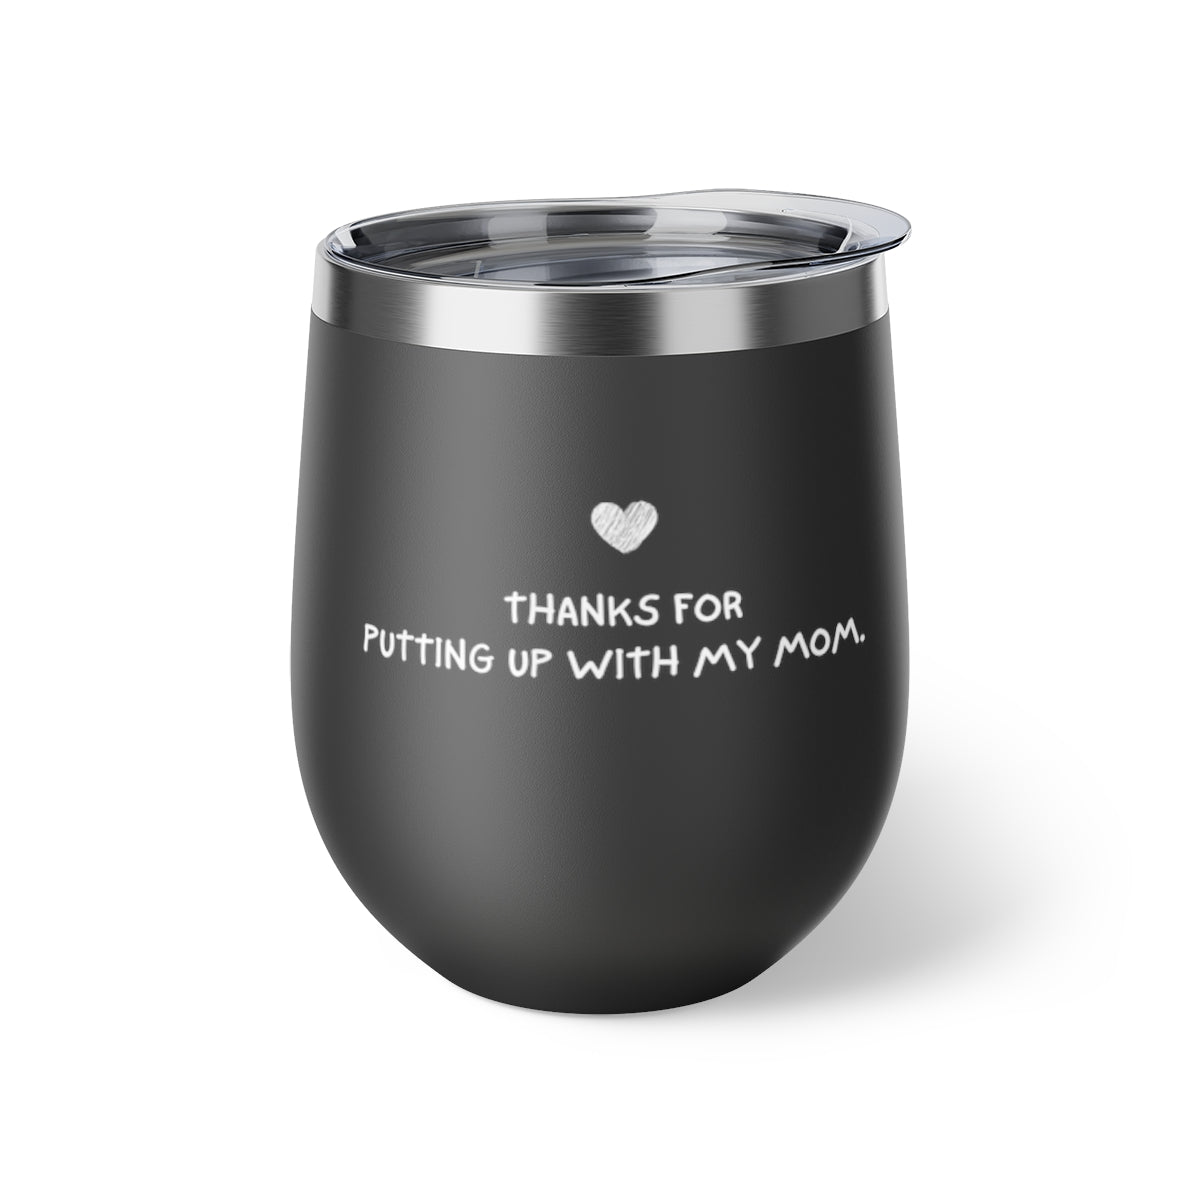 Every Father's Day, stepdads don't get the gift they deserve, but this is the day - Copper Vacuum Insulated Cup, 12oz Mug Printify 